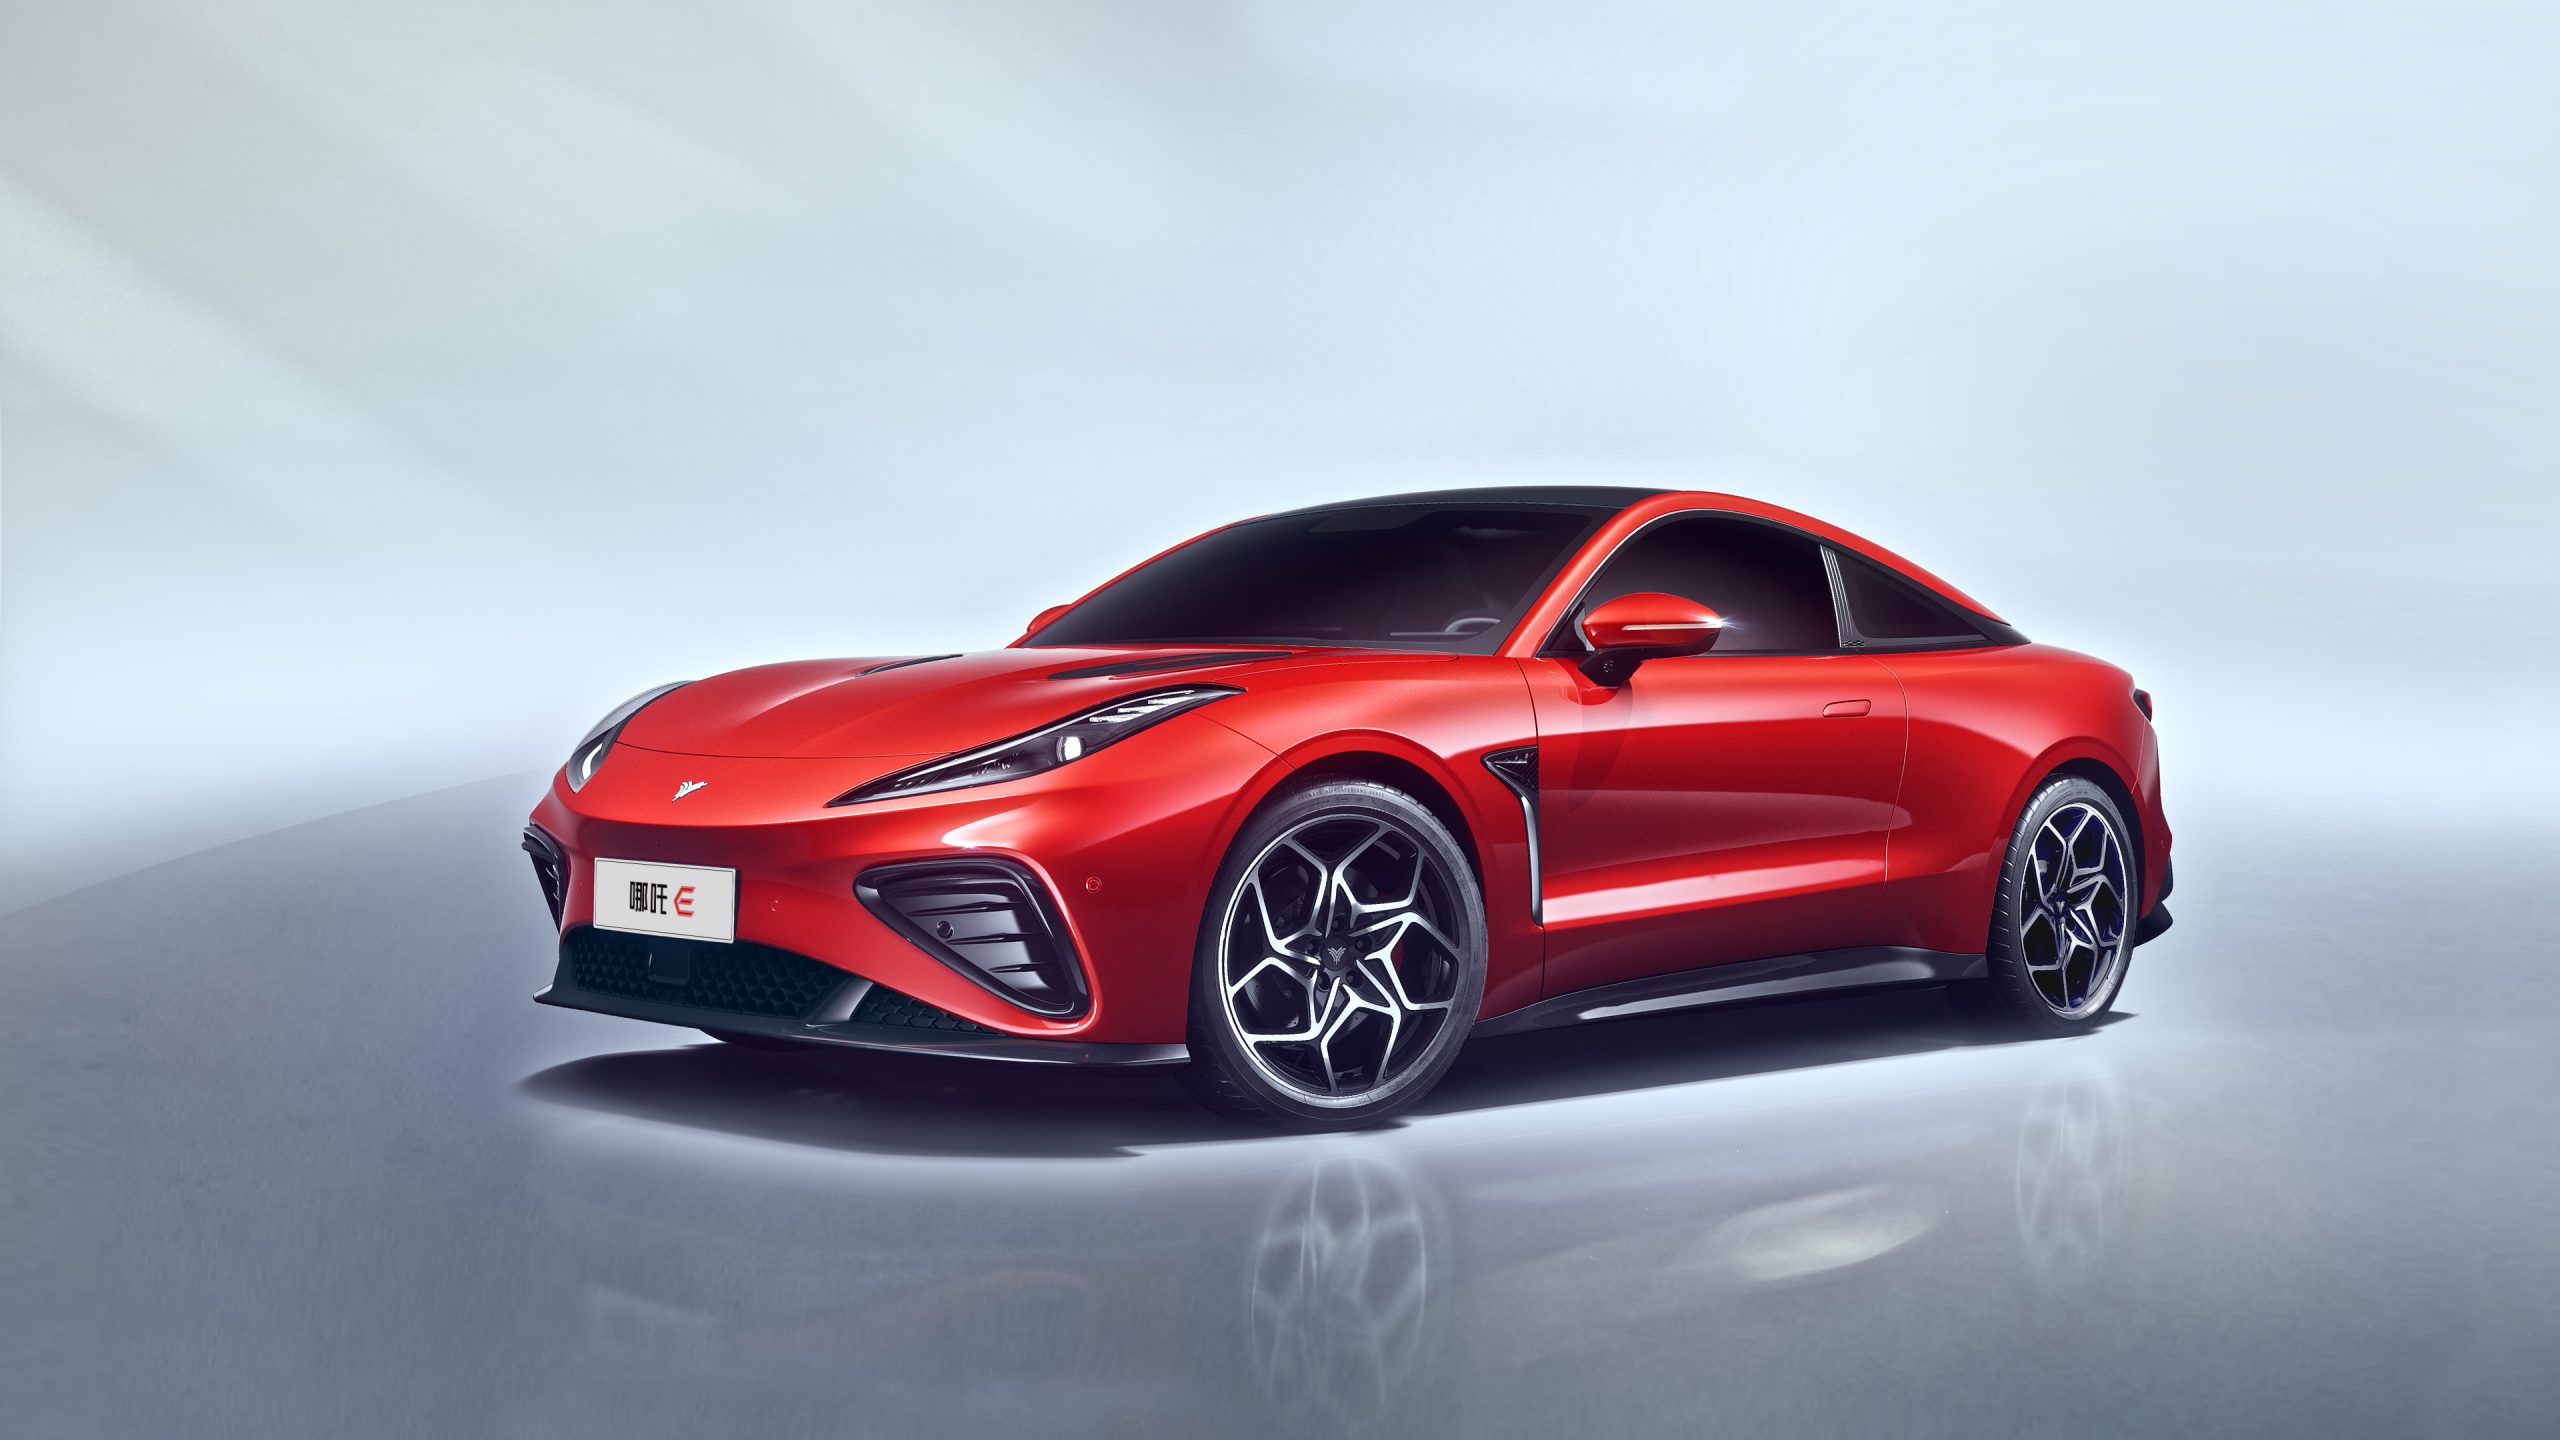 Nezha Sports Car lands at MIIT, with a price expected to be below 300,000 yuan.